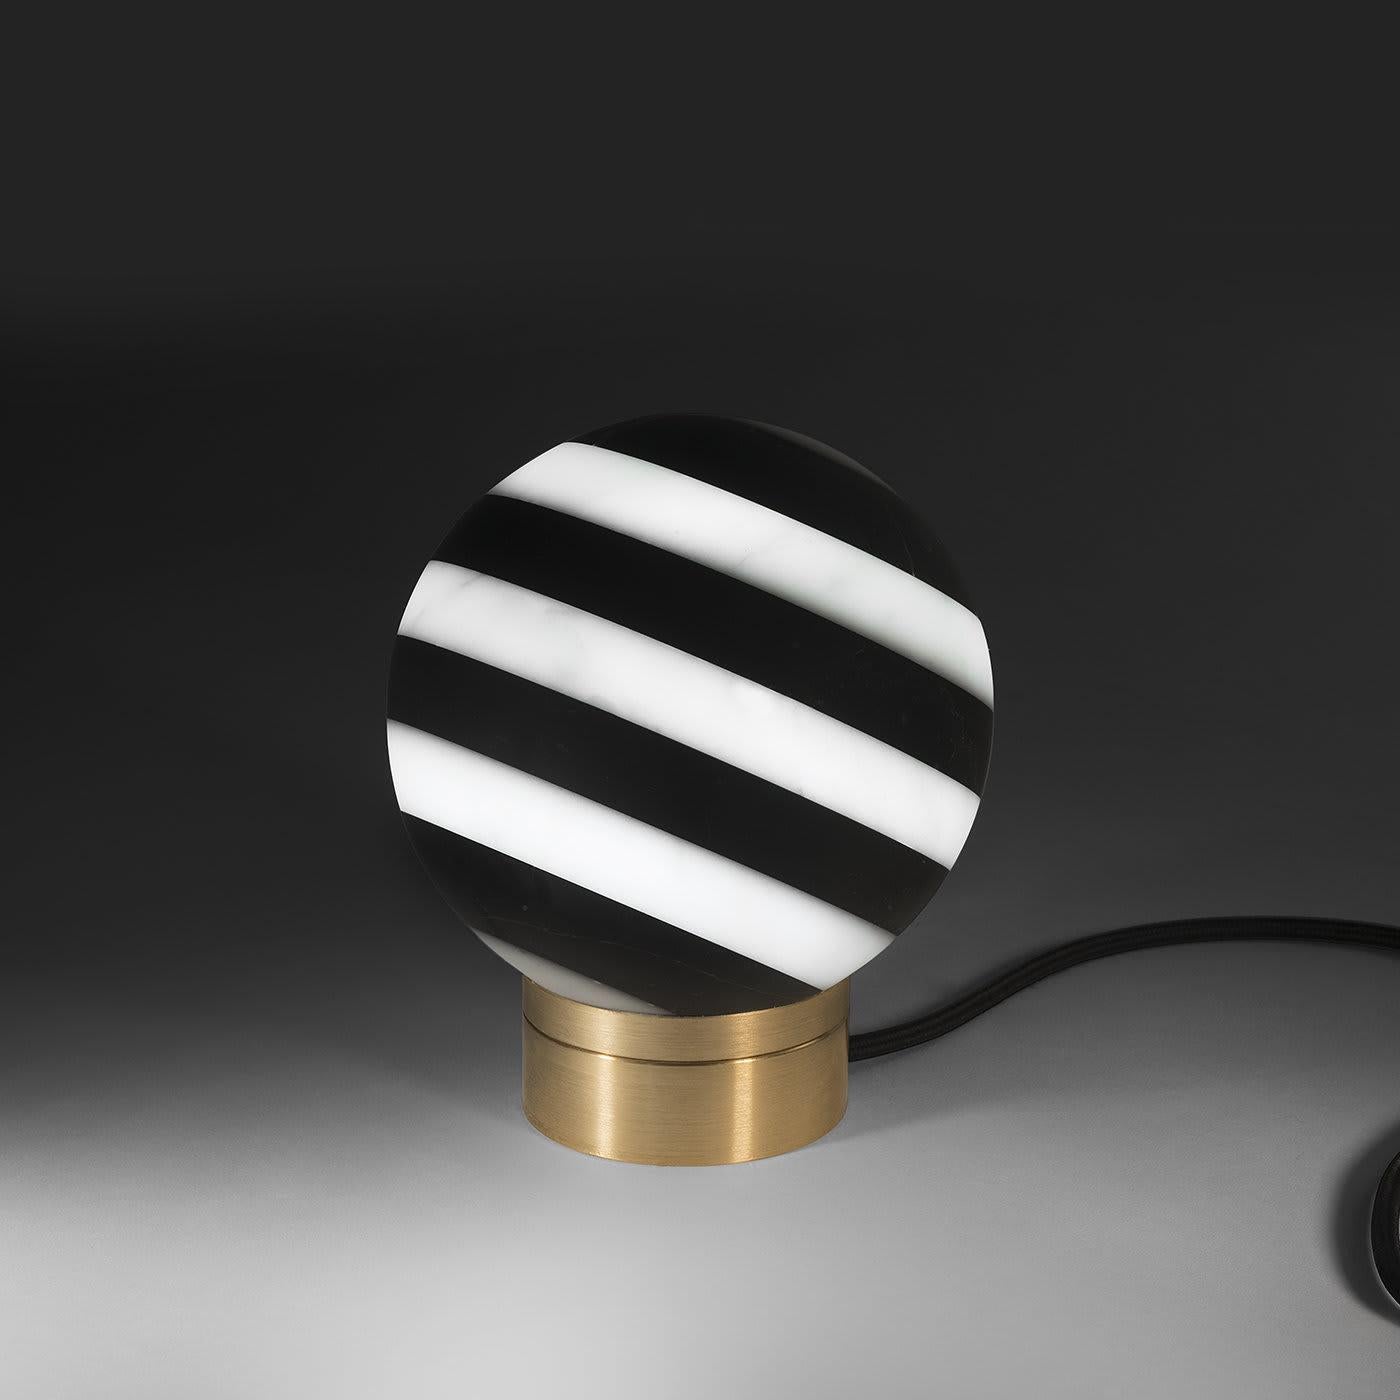 Inspired by the captivating black and white stone buildings found across Europe, this exceptional table lamp will cast an alluring glow in a traditional or minimalist decor. Mounted on a circular brass base with a gold finish, the orb-shaped lamp is